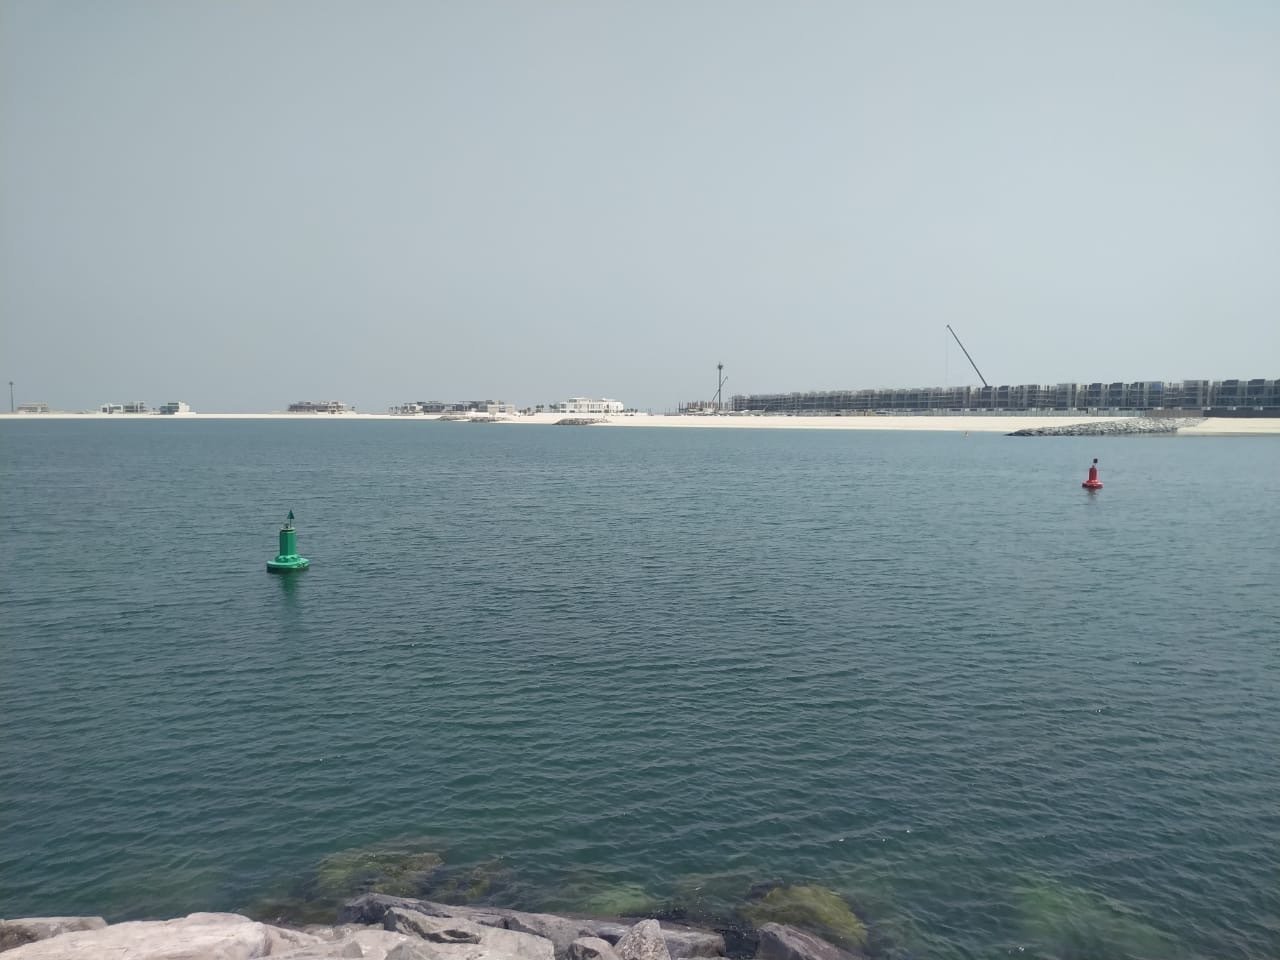 Ecocoast’s ENB range of buoys deliver results for high-profile Dubai projects